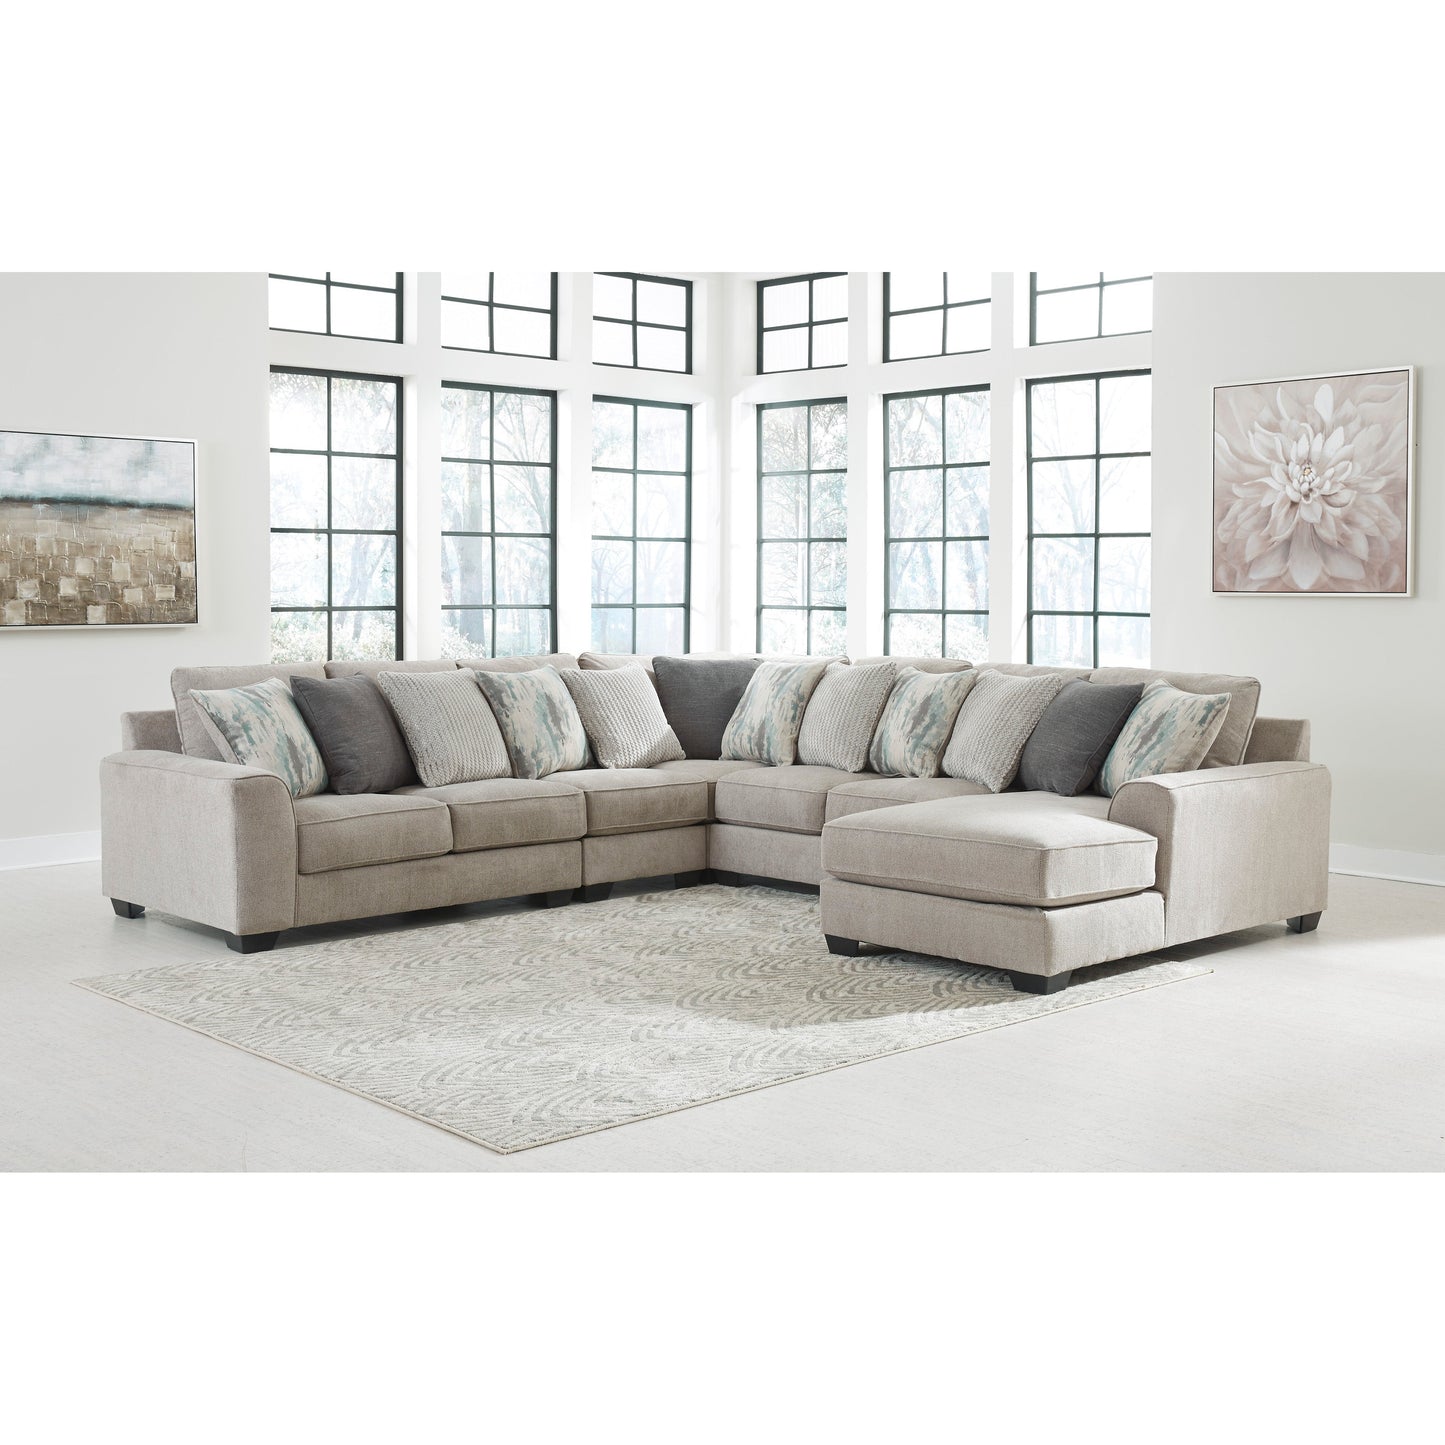 ARDSLEY 4 PC SECTIONAL - PEWTER